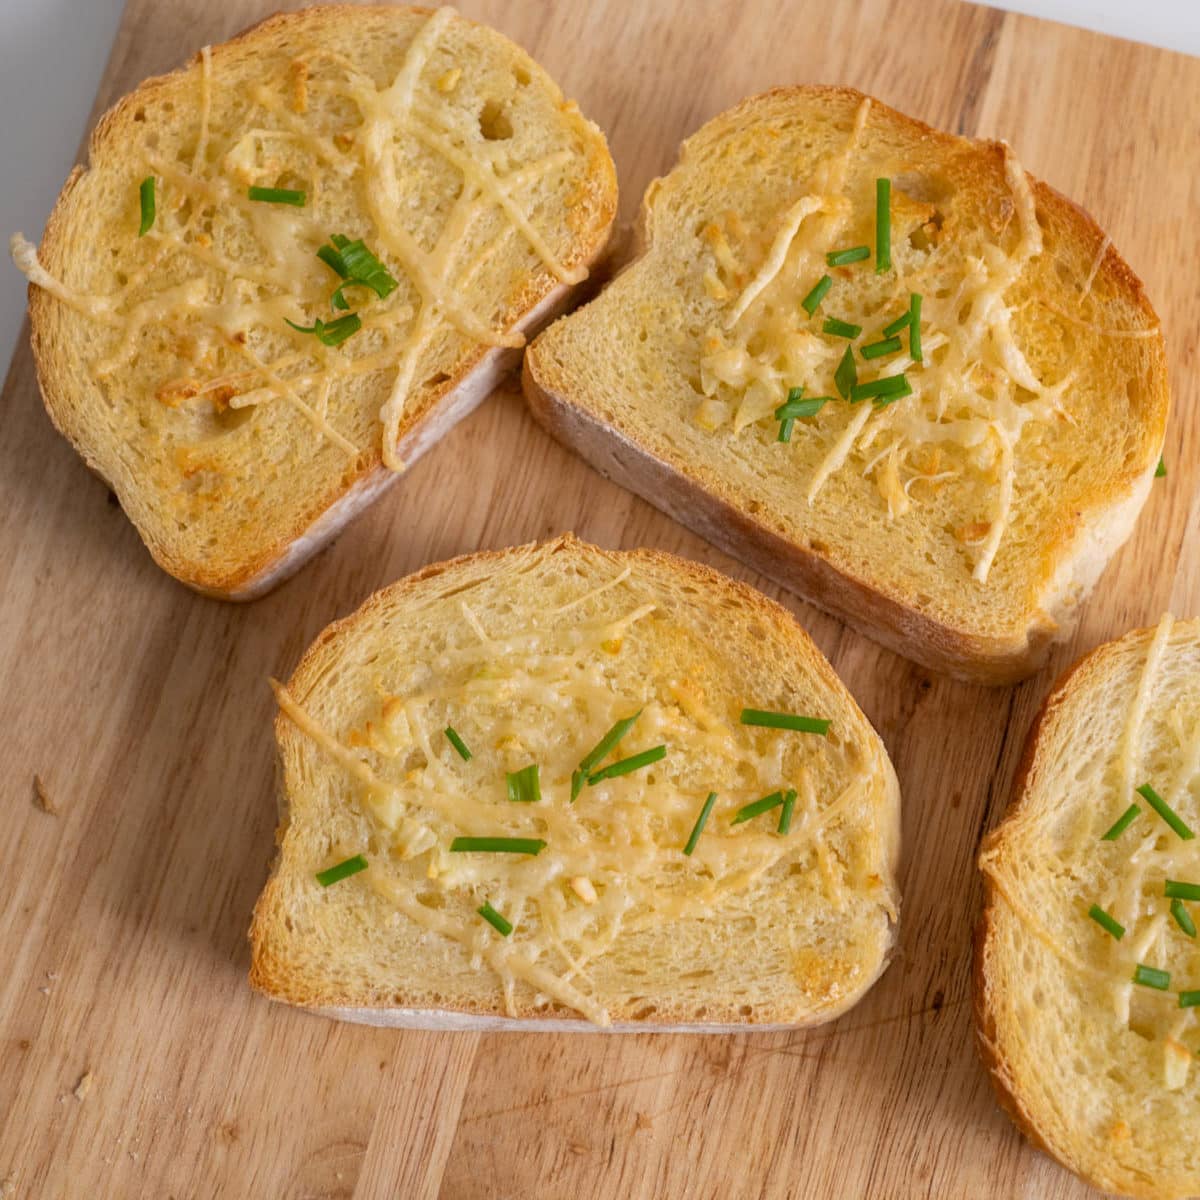 Top view of garlic bread with butter, garlic, Parmesan cheese and chives.